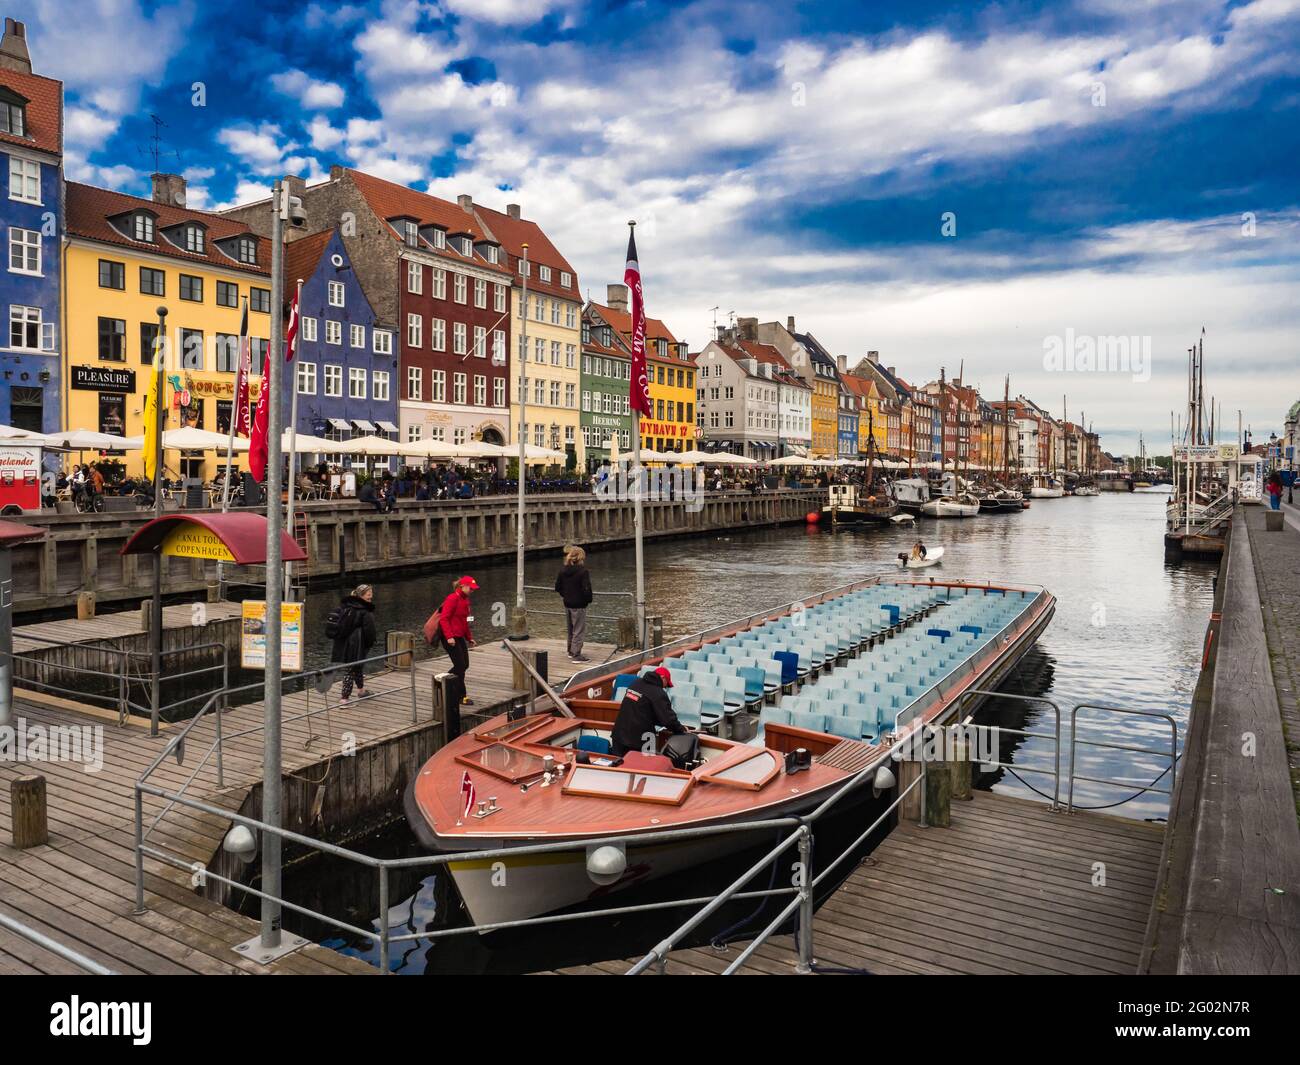 Nyhavn (New Harbour), Copenhagen, Denmark - May 2019: View of Nyhavn canal with color buildings, ships, yachts and other boats in the Old Town of Cope Stock Photo